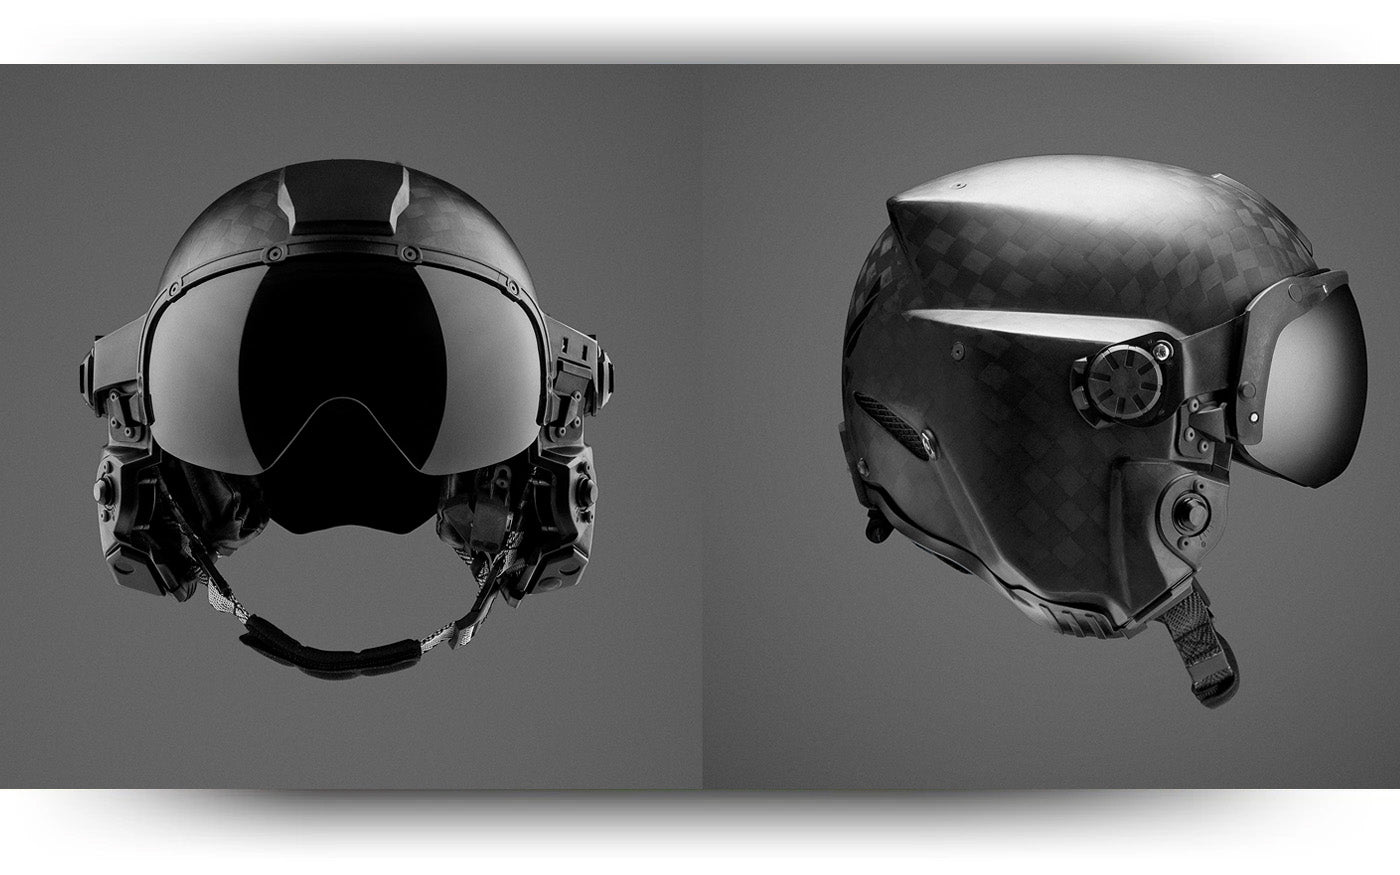 LIFT Airborne progresses in delivering the Next Generation of Fixed Wing Helmets